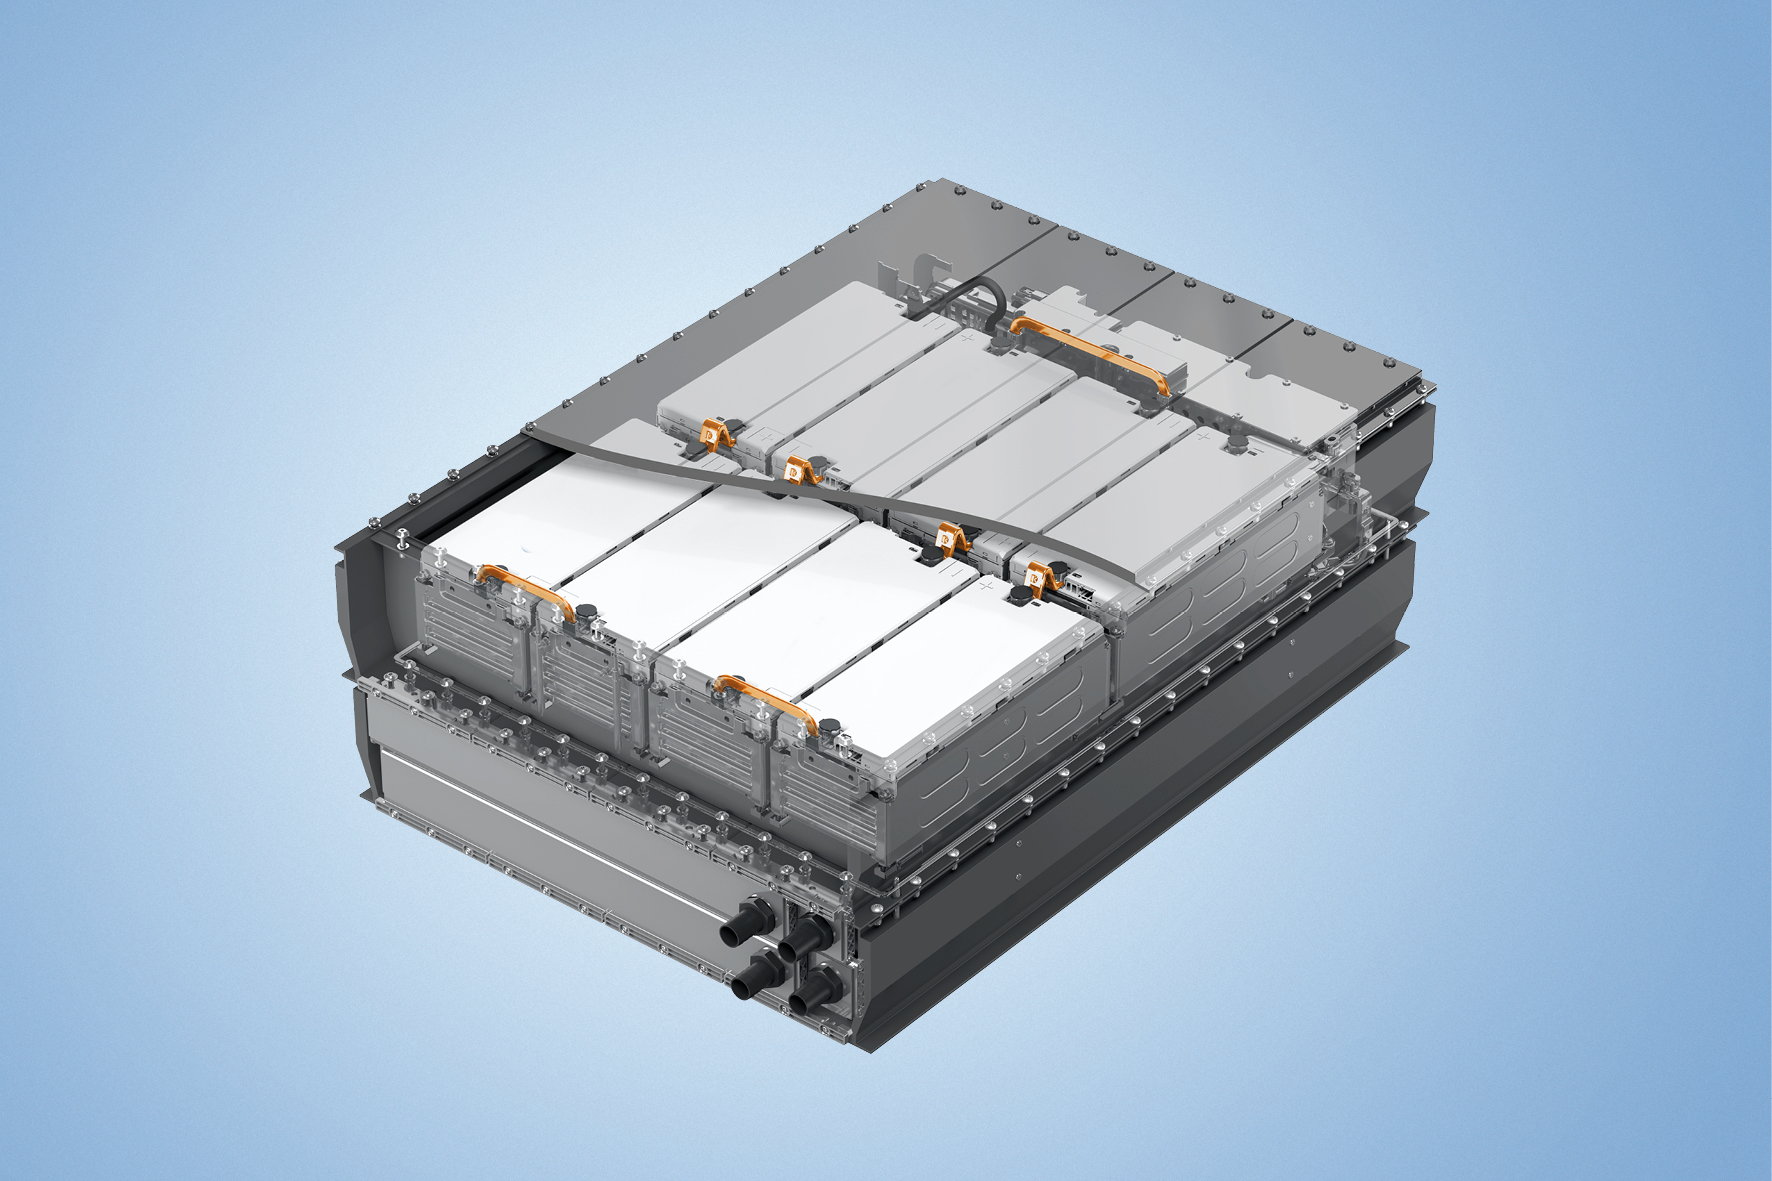 Webasto Announces Modular Battery System, Thermal Management and